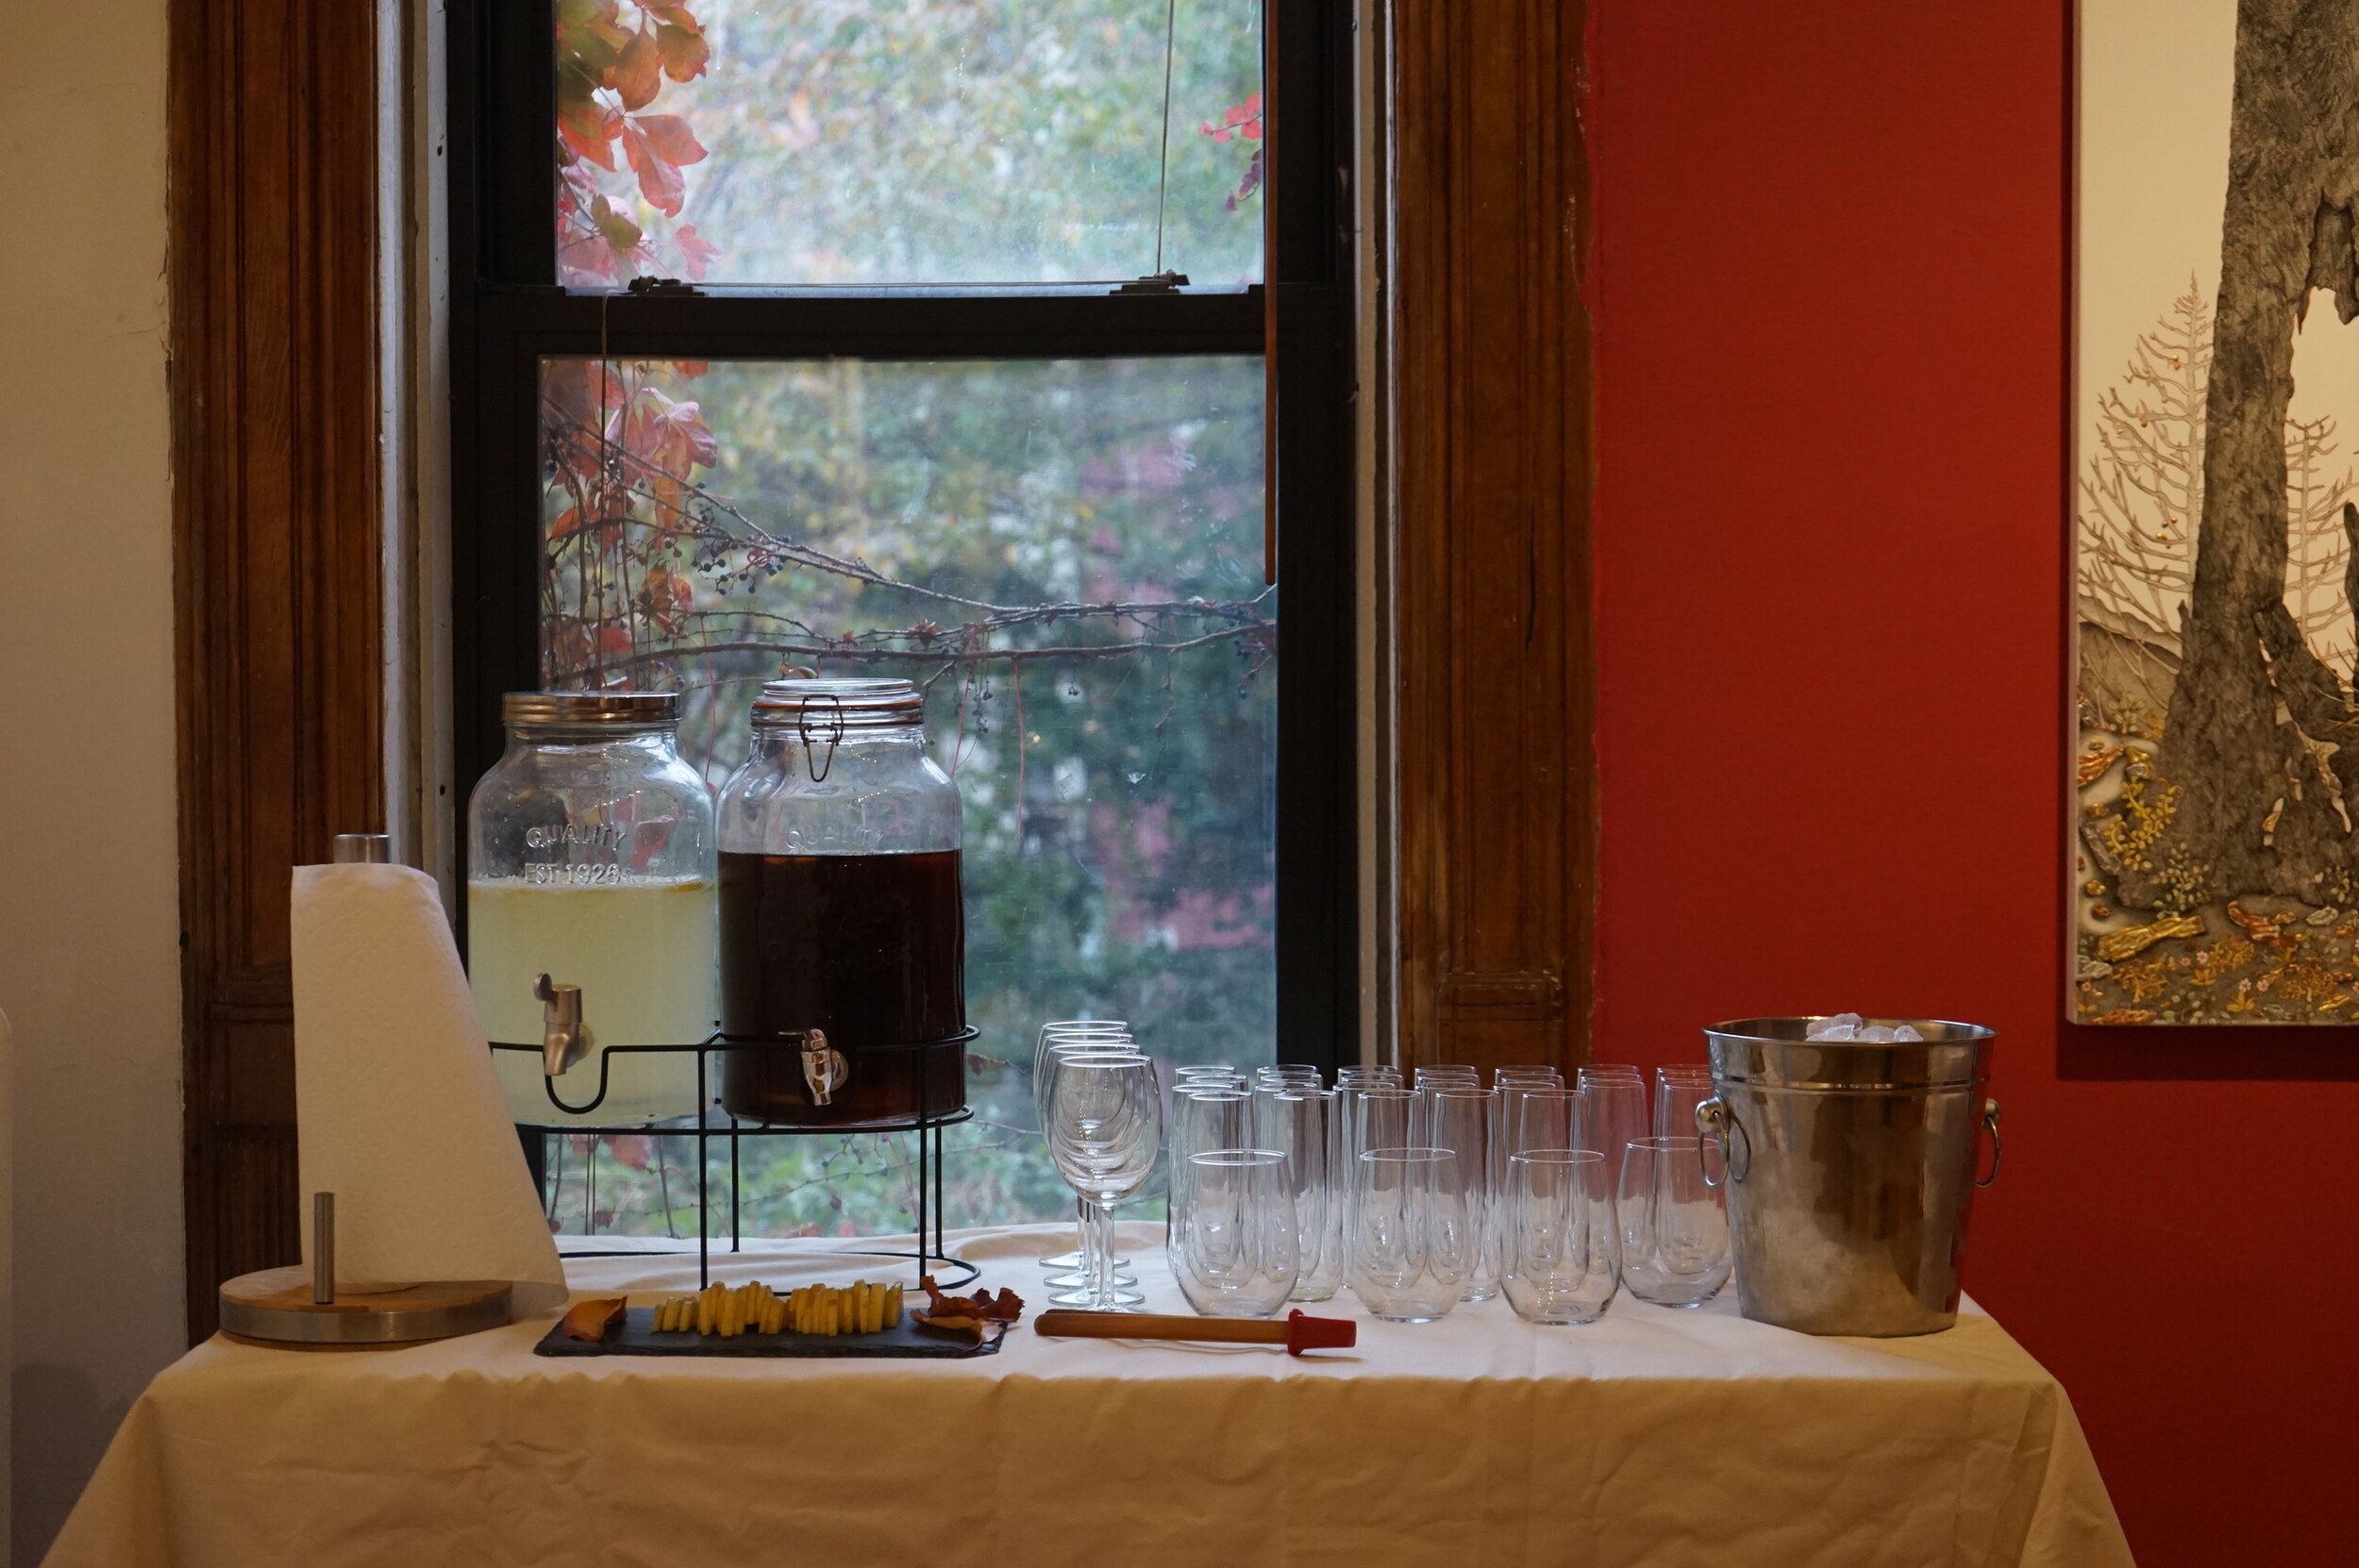   Between Earth and Falling Leaves  - Dessert Tasting Party, photo by Yilan Wang, courtesy Fou Gallery. 